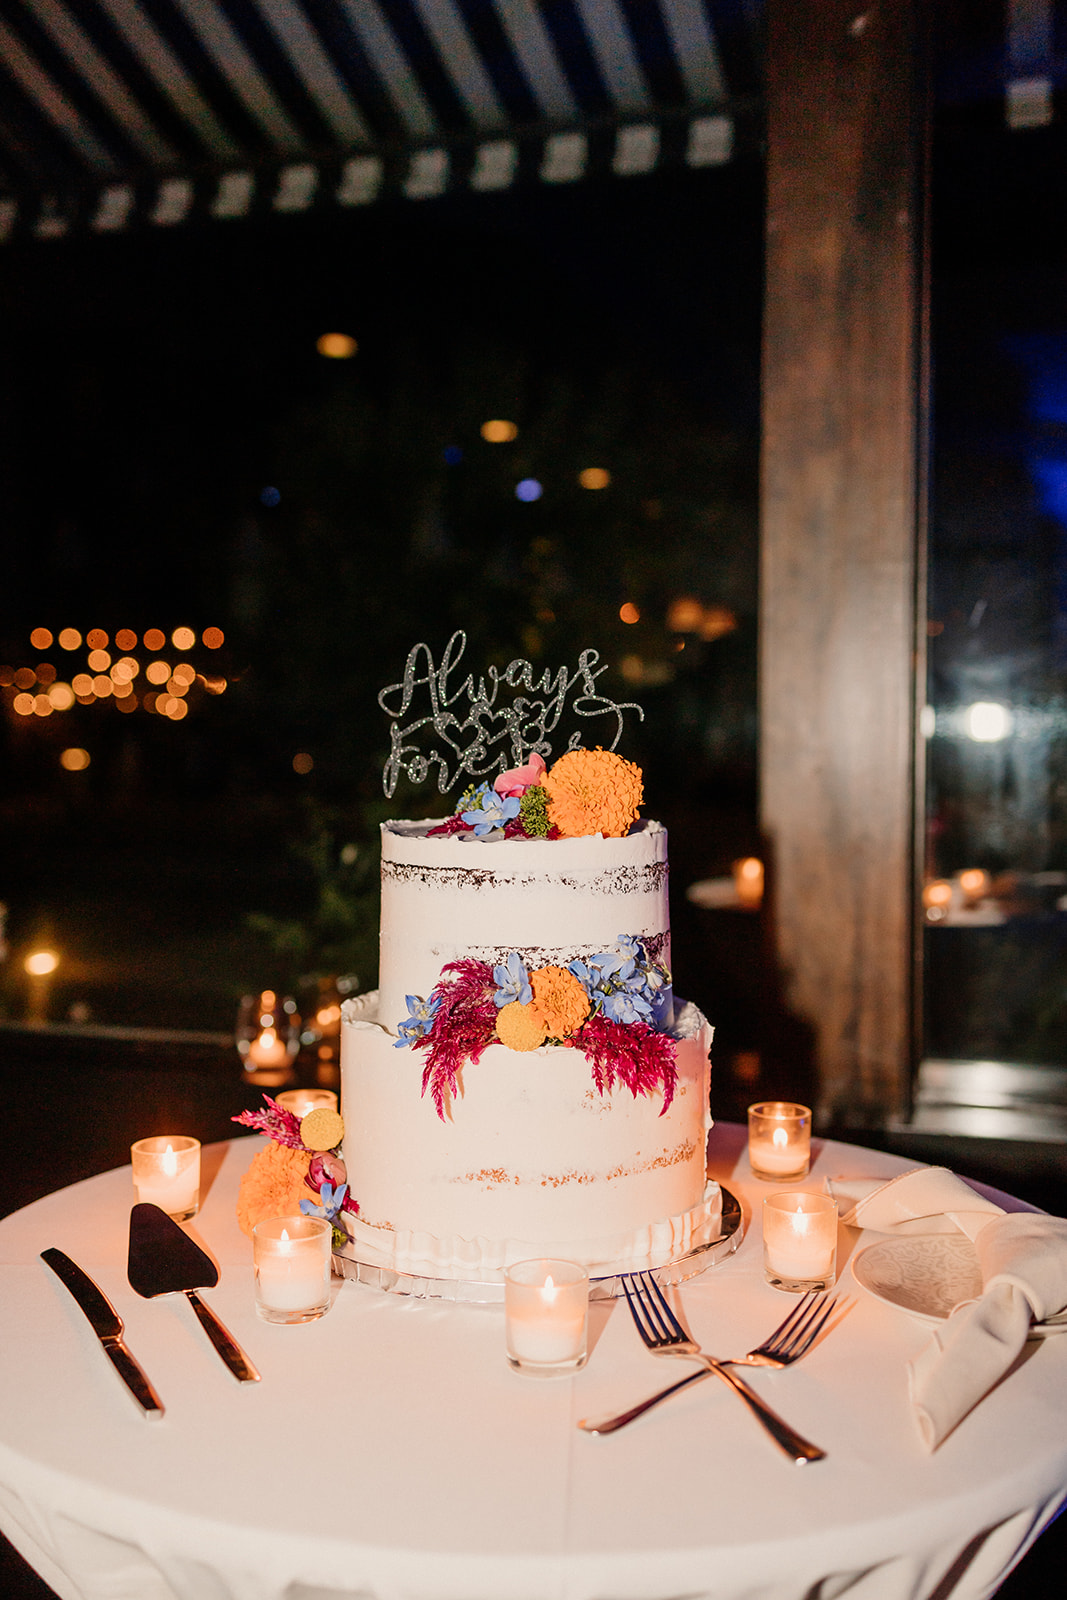 A multi-tiered wedding cake with colorful floral designs on a table, surrounded by lit candles, with a dimly lit background.